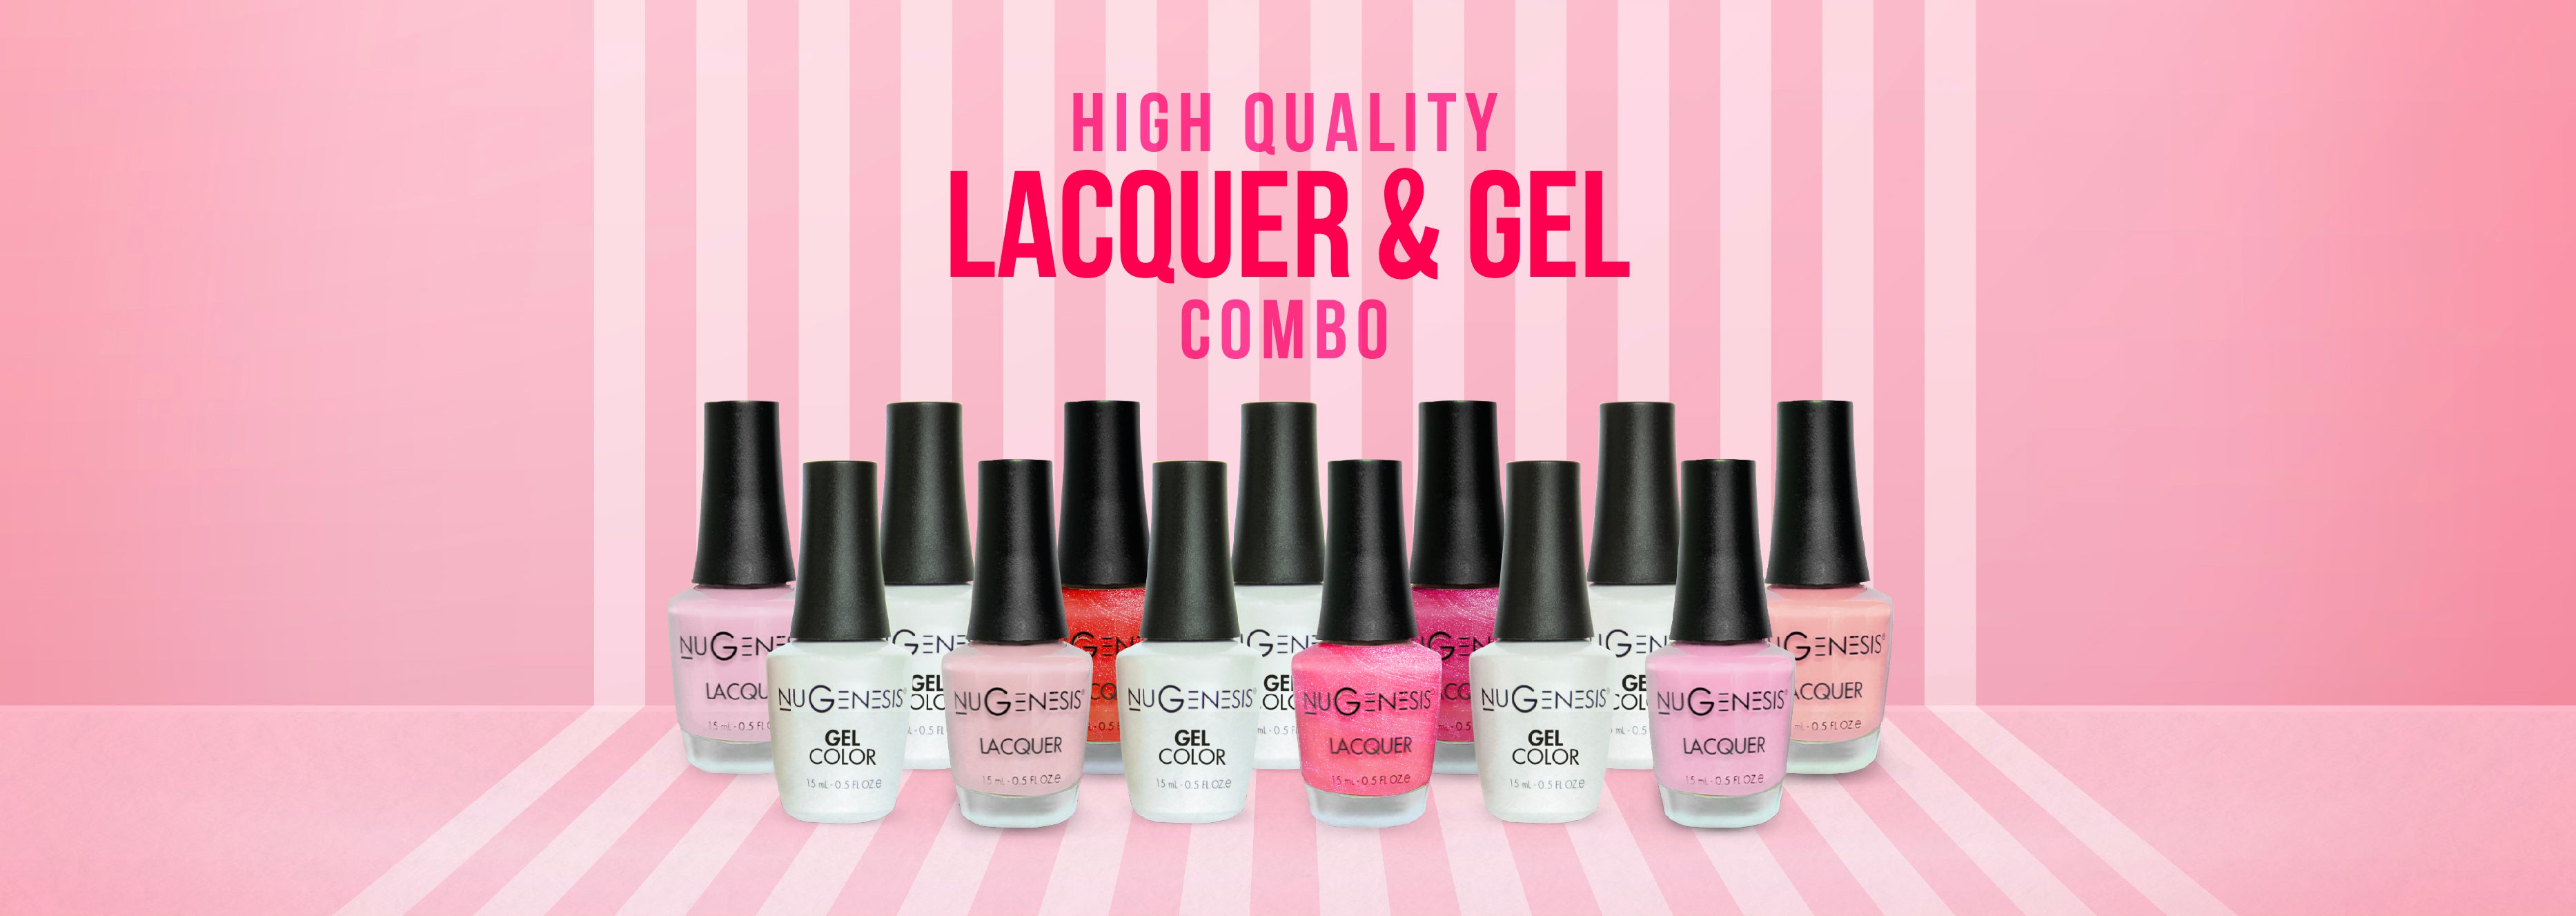 Combo Lacquer & Gel Nail Colors